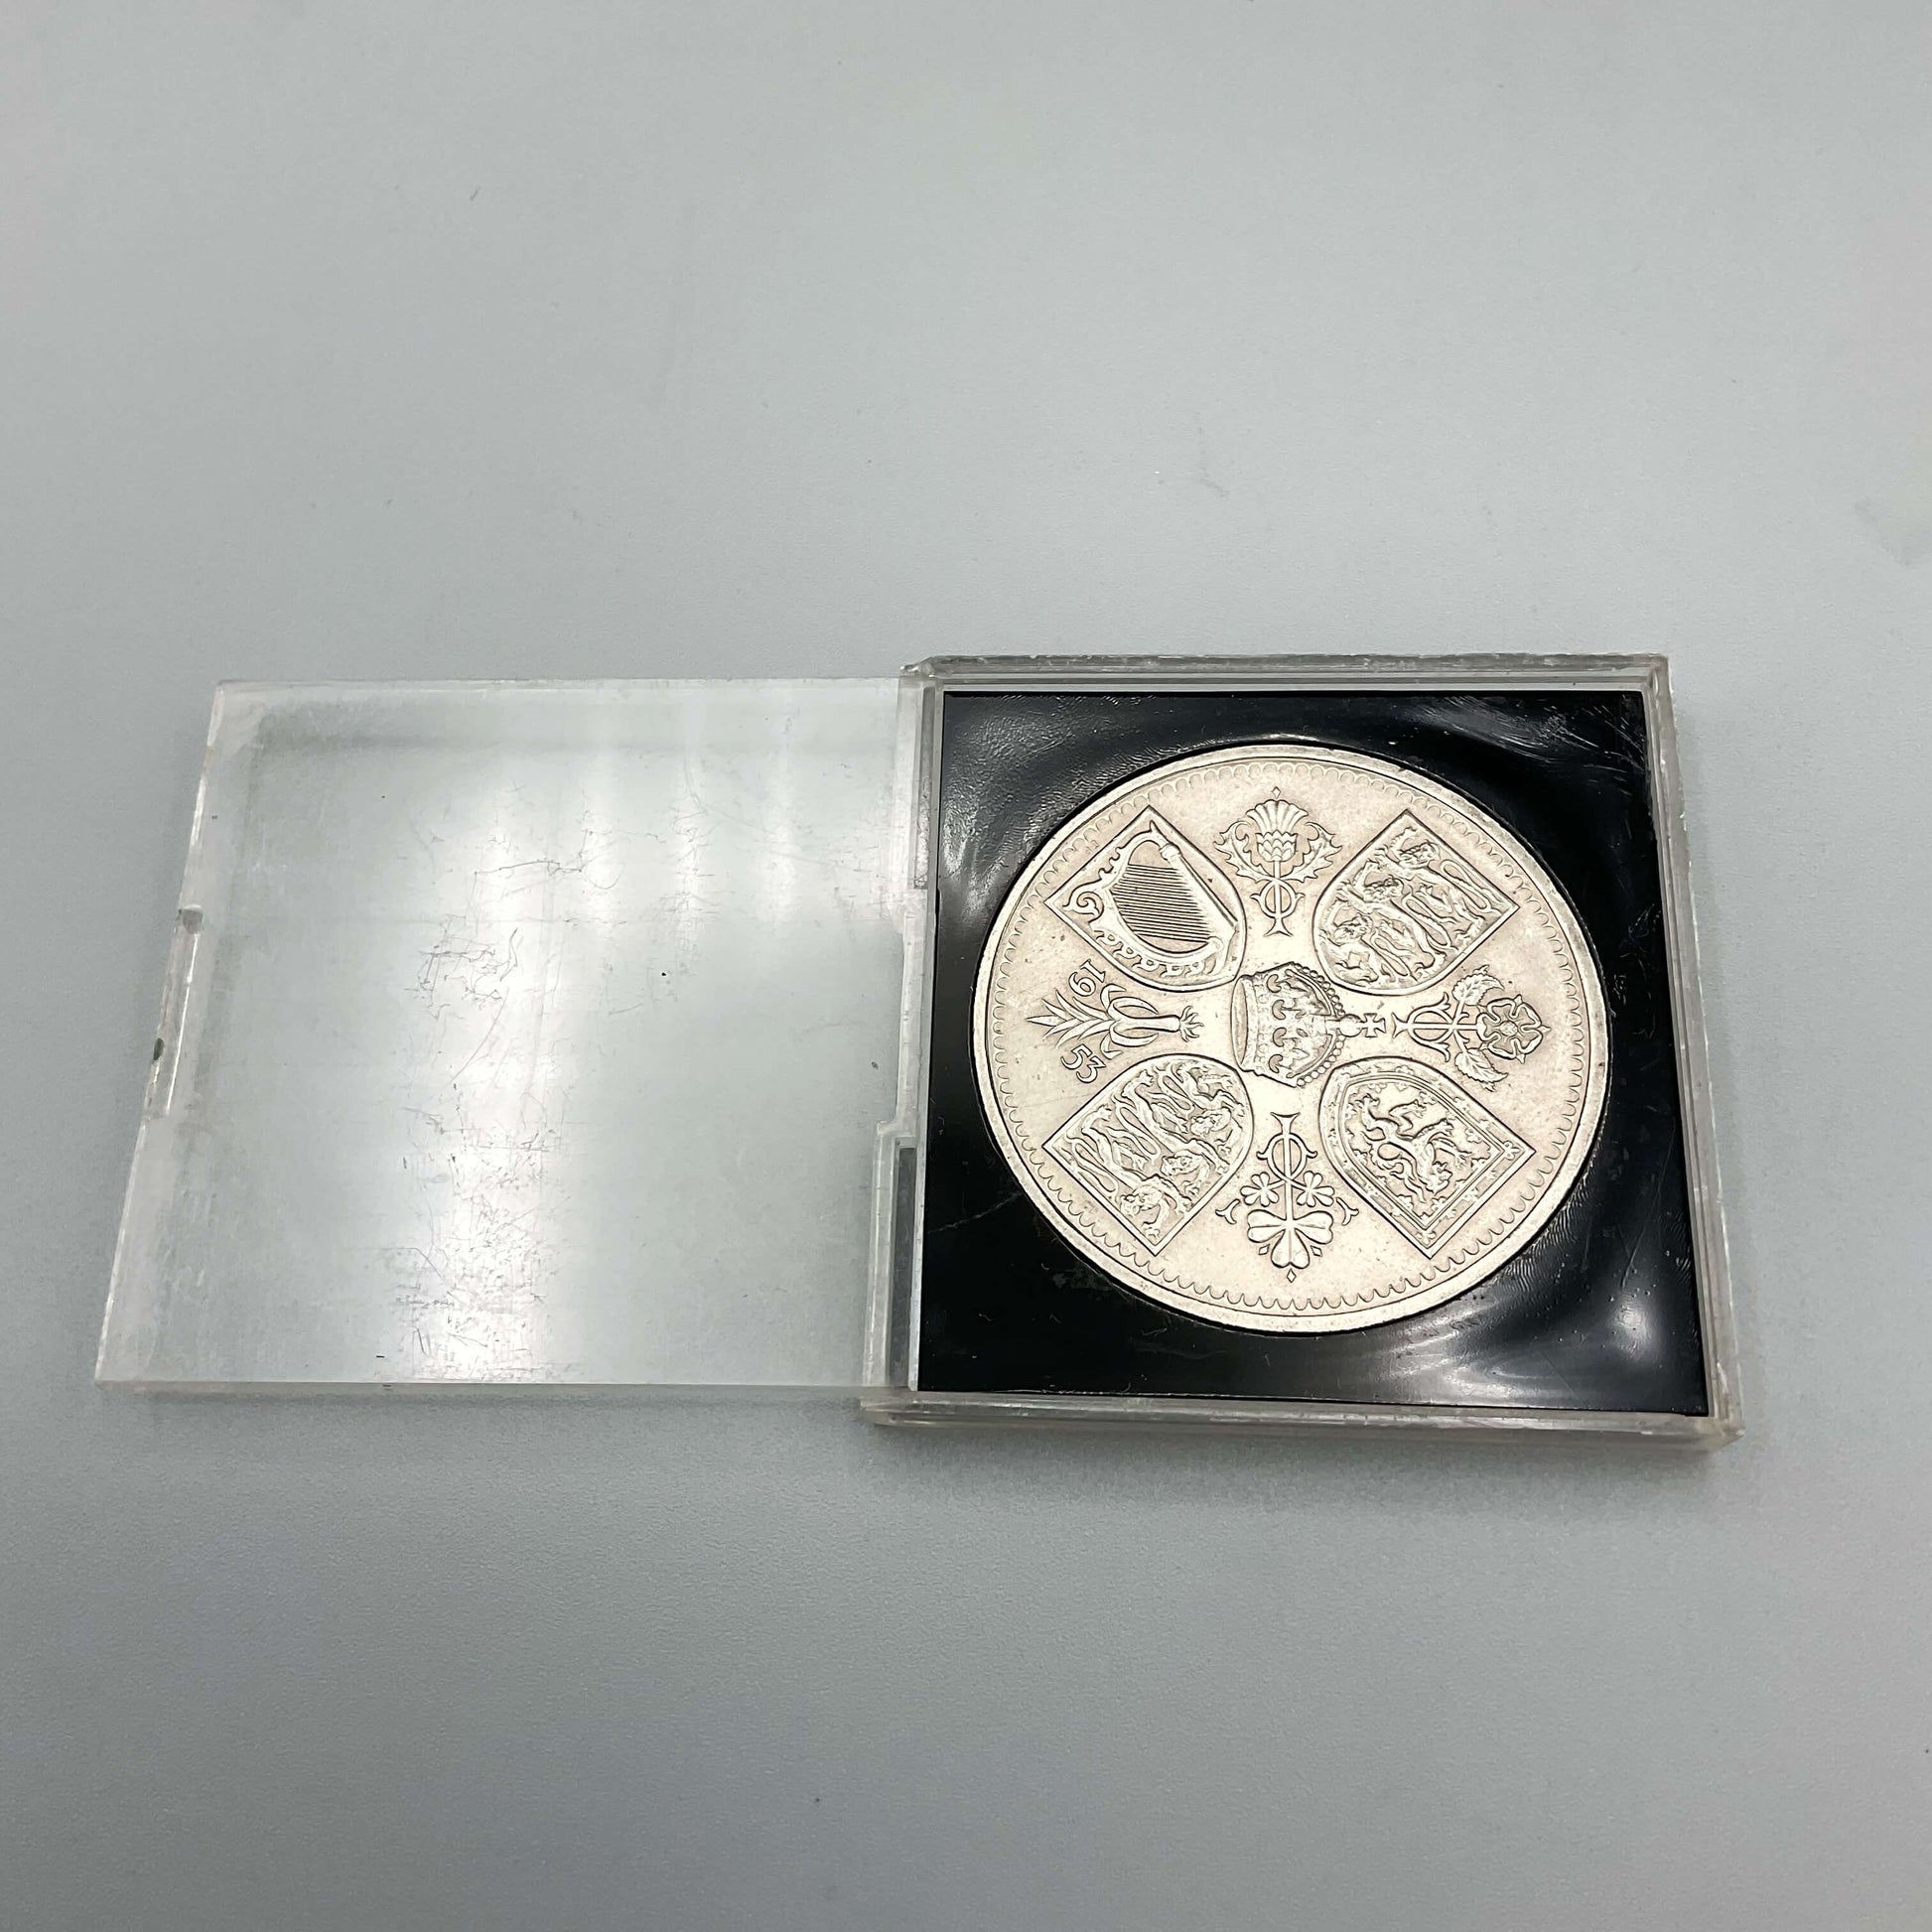 Queen Elizabeth II Coronation Five Shilling Coin in a Perspex Case with the lid removed